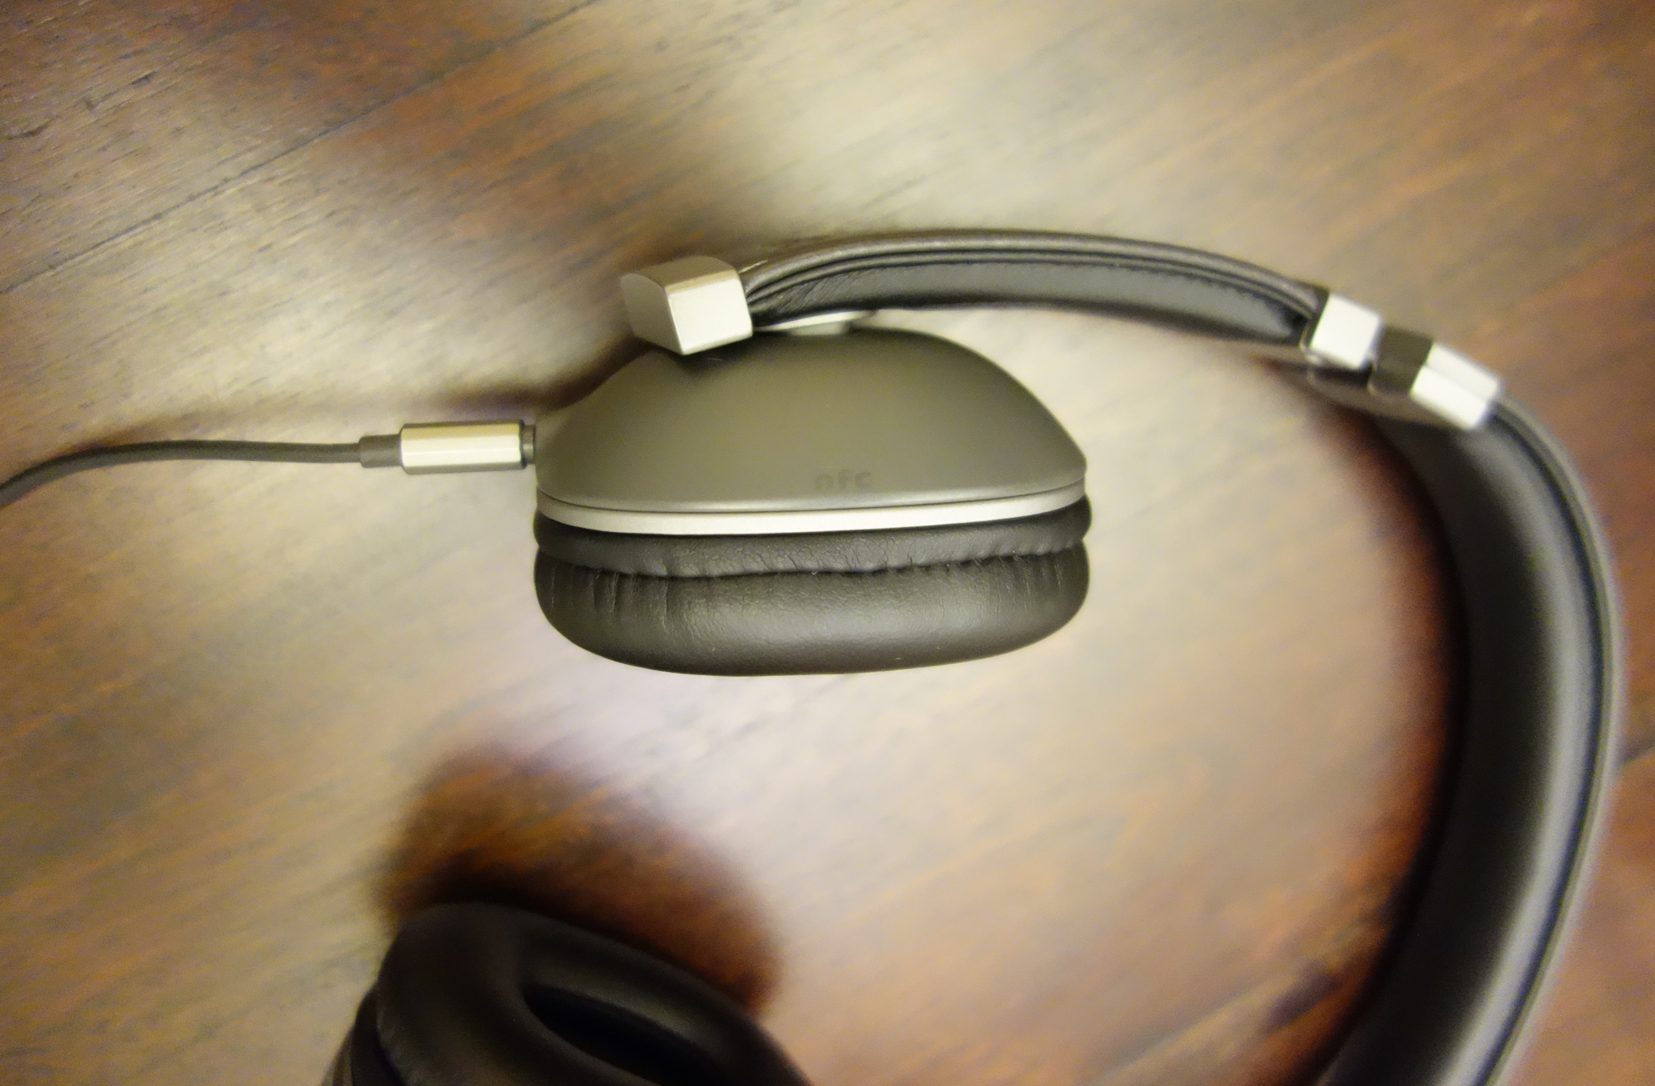 Polk Hinge Wireless Black Headset Review Cabled